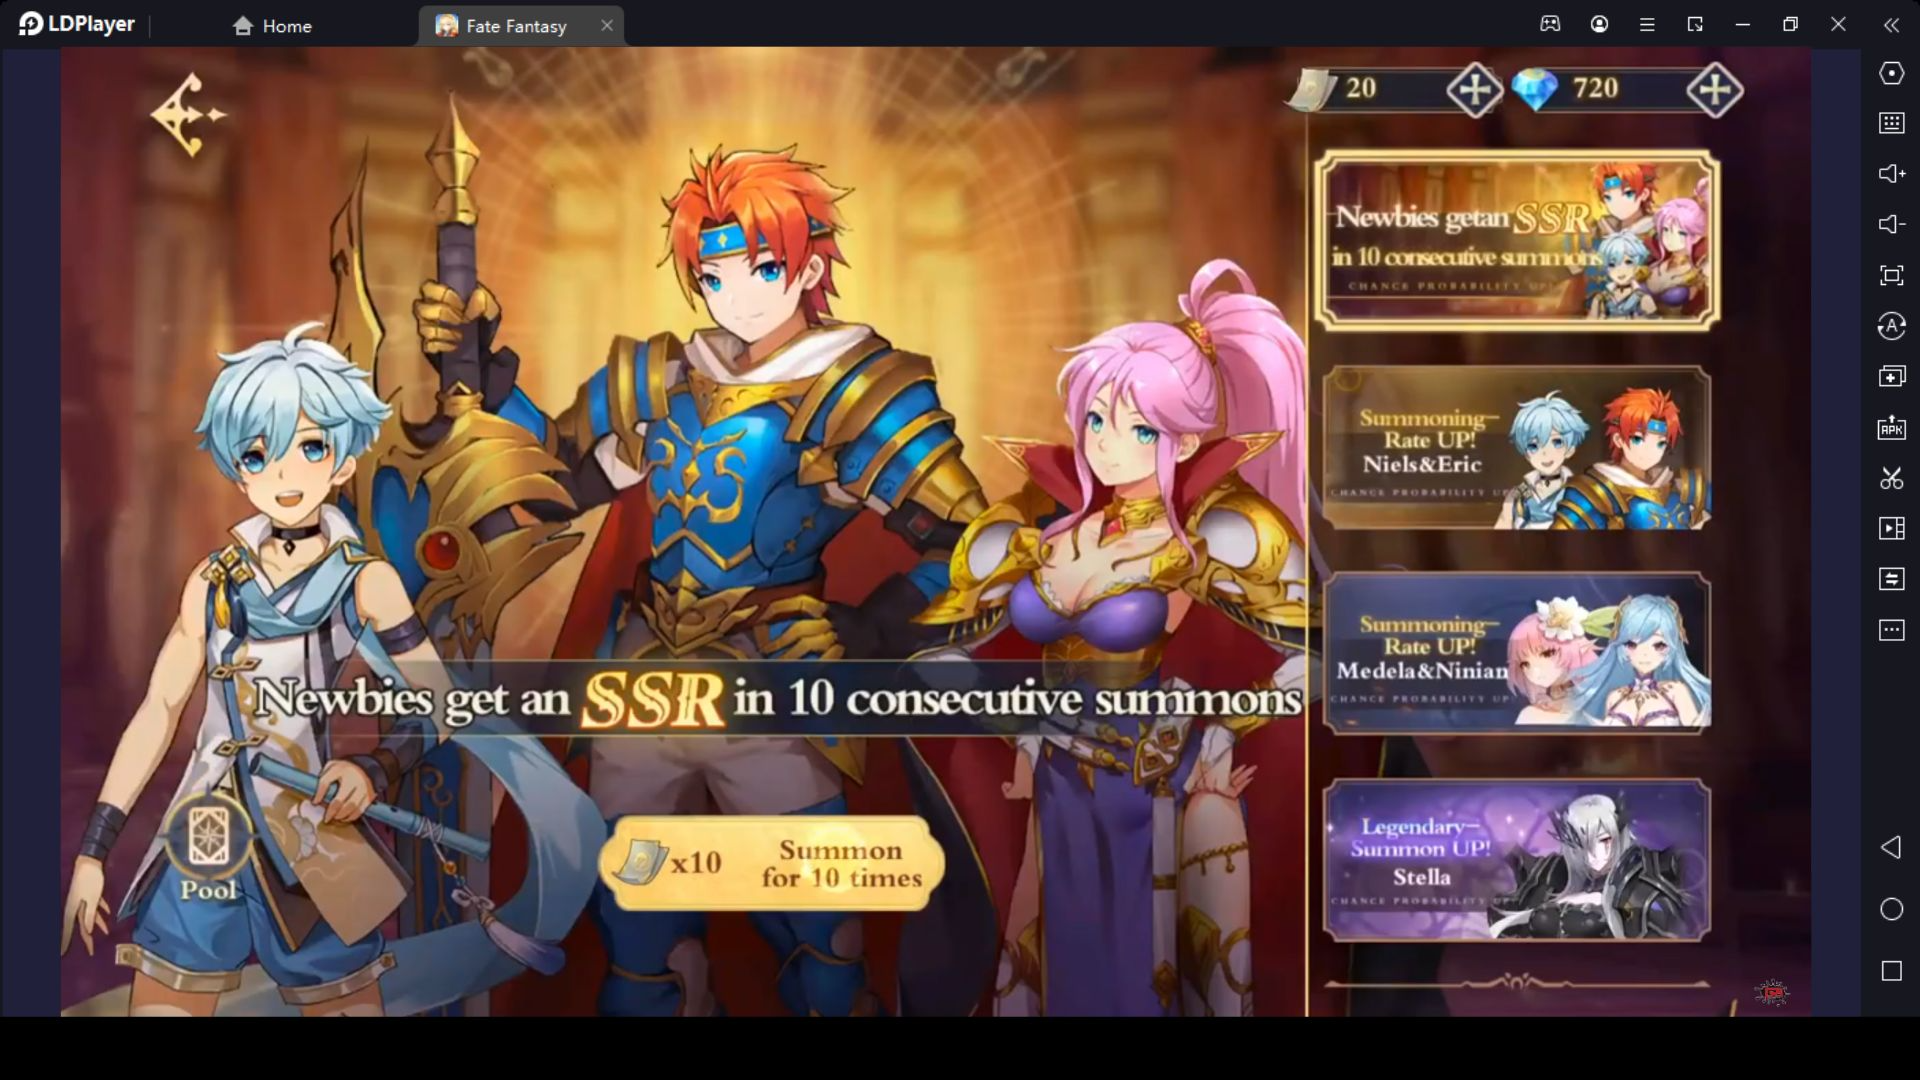 Summon Heroes for Your Fate Fantasy Gameplay